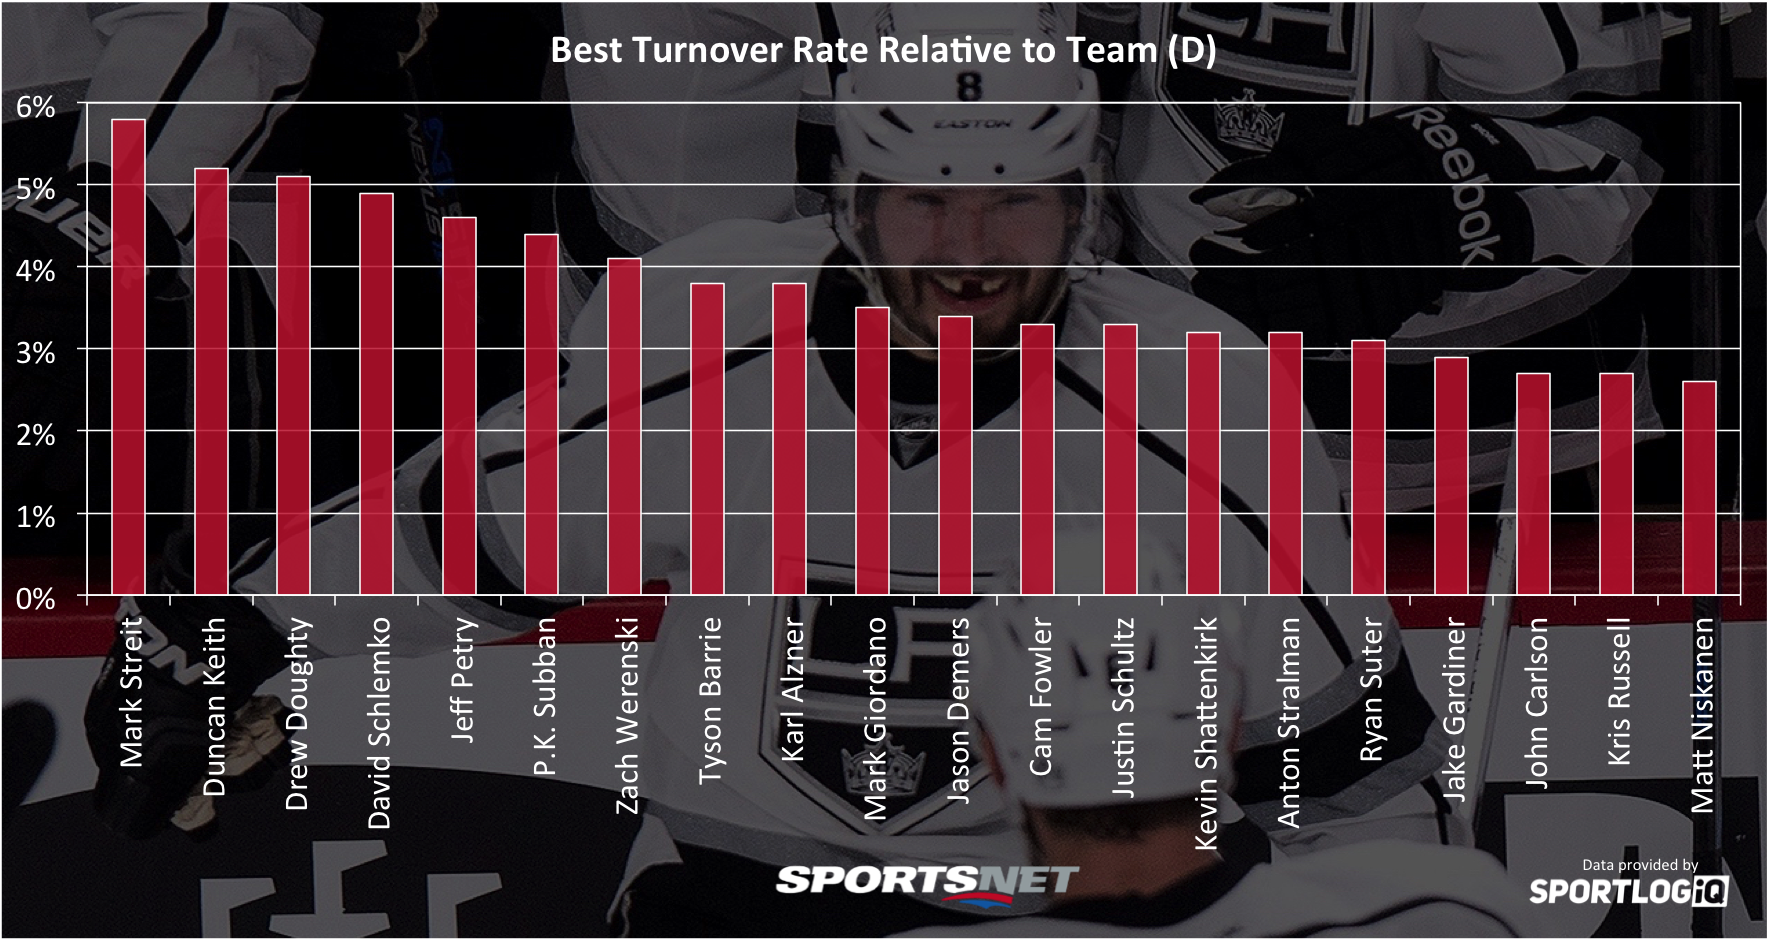 nhl-best-relative-turnover-rates